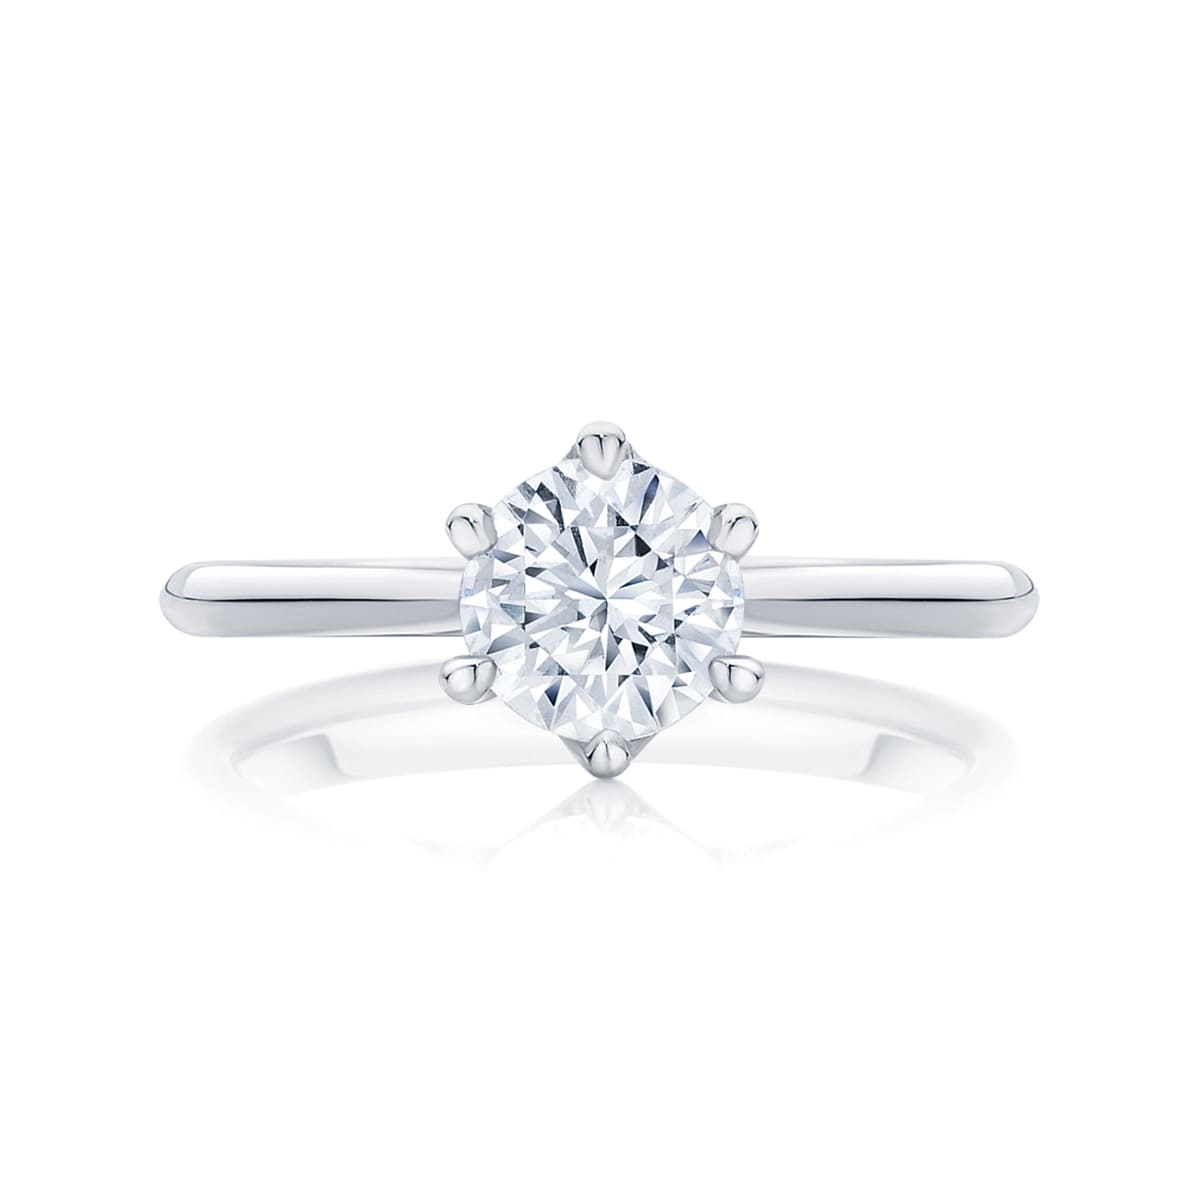 Round diamond engagement ring white gold solitaire